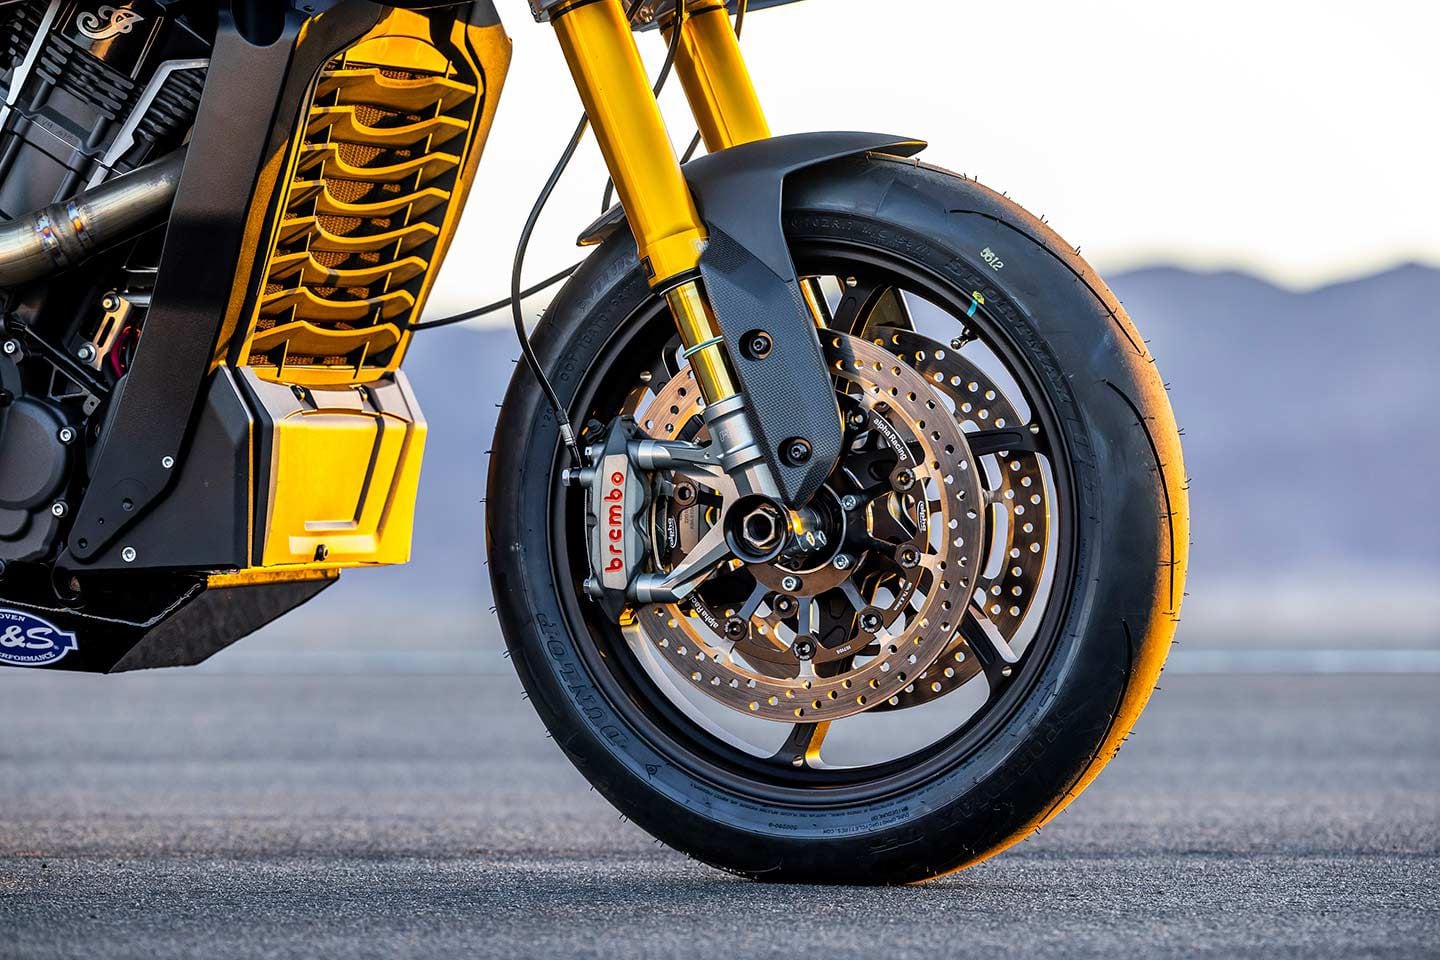 Stopping power is crucial on the big bagger, so race-spec Brembo M4 calipers and 330mm discs are enlisted up front.